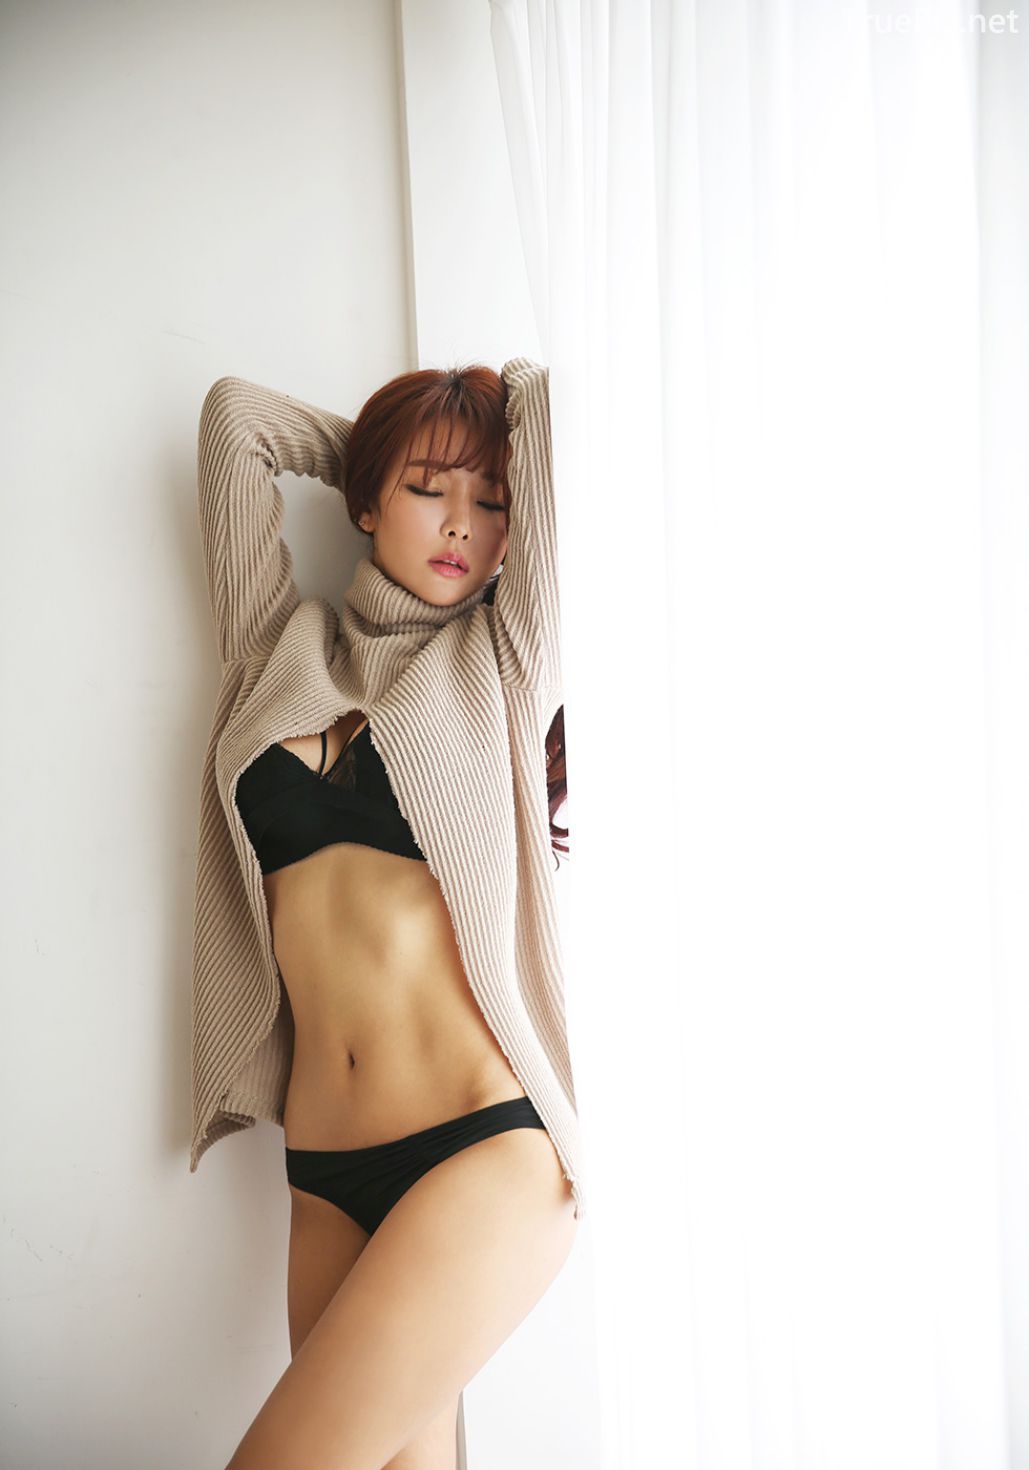 Korean-Lingerie-Fashion-Lee-Da-Hee-model-Tell-Me-What-You-Want-To-Do-TruePic.net- Picture 22